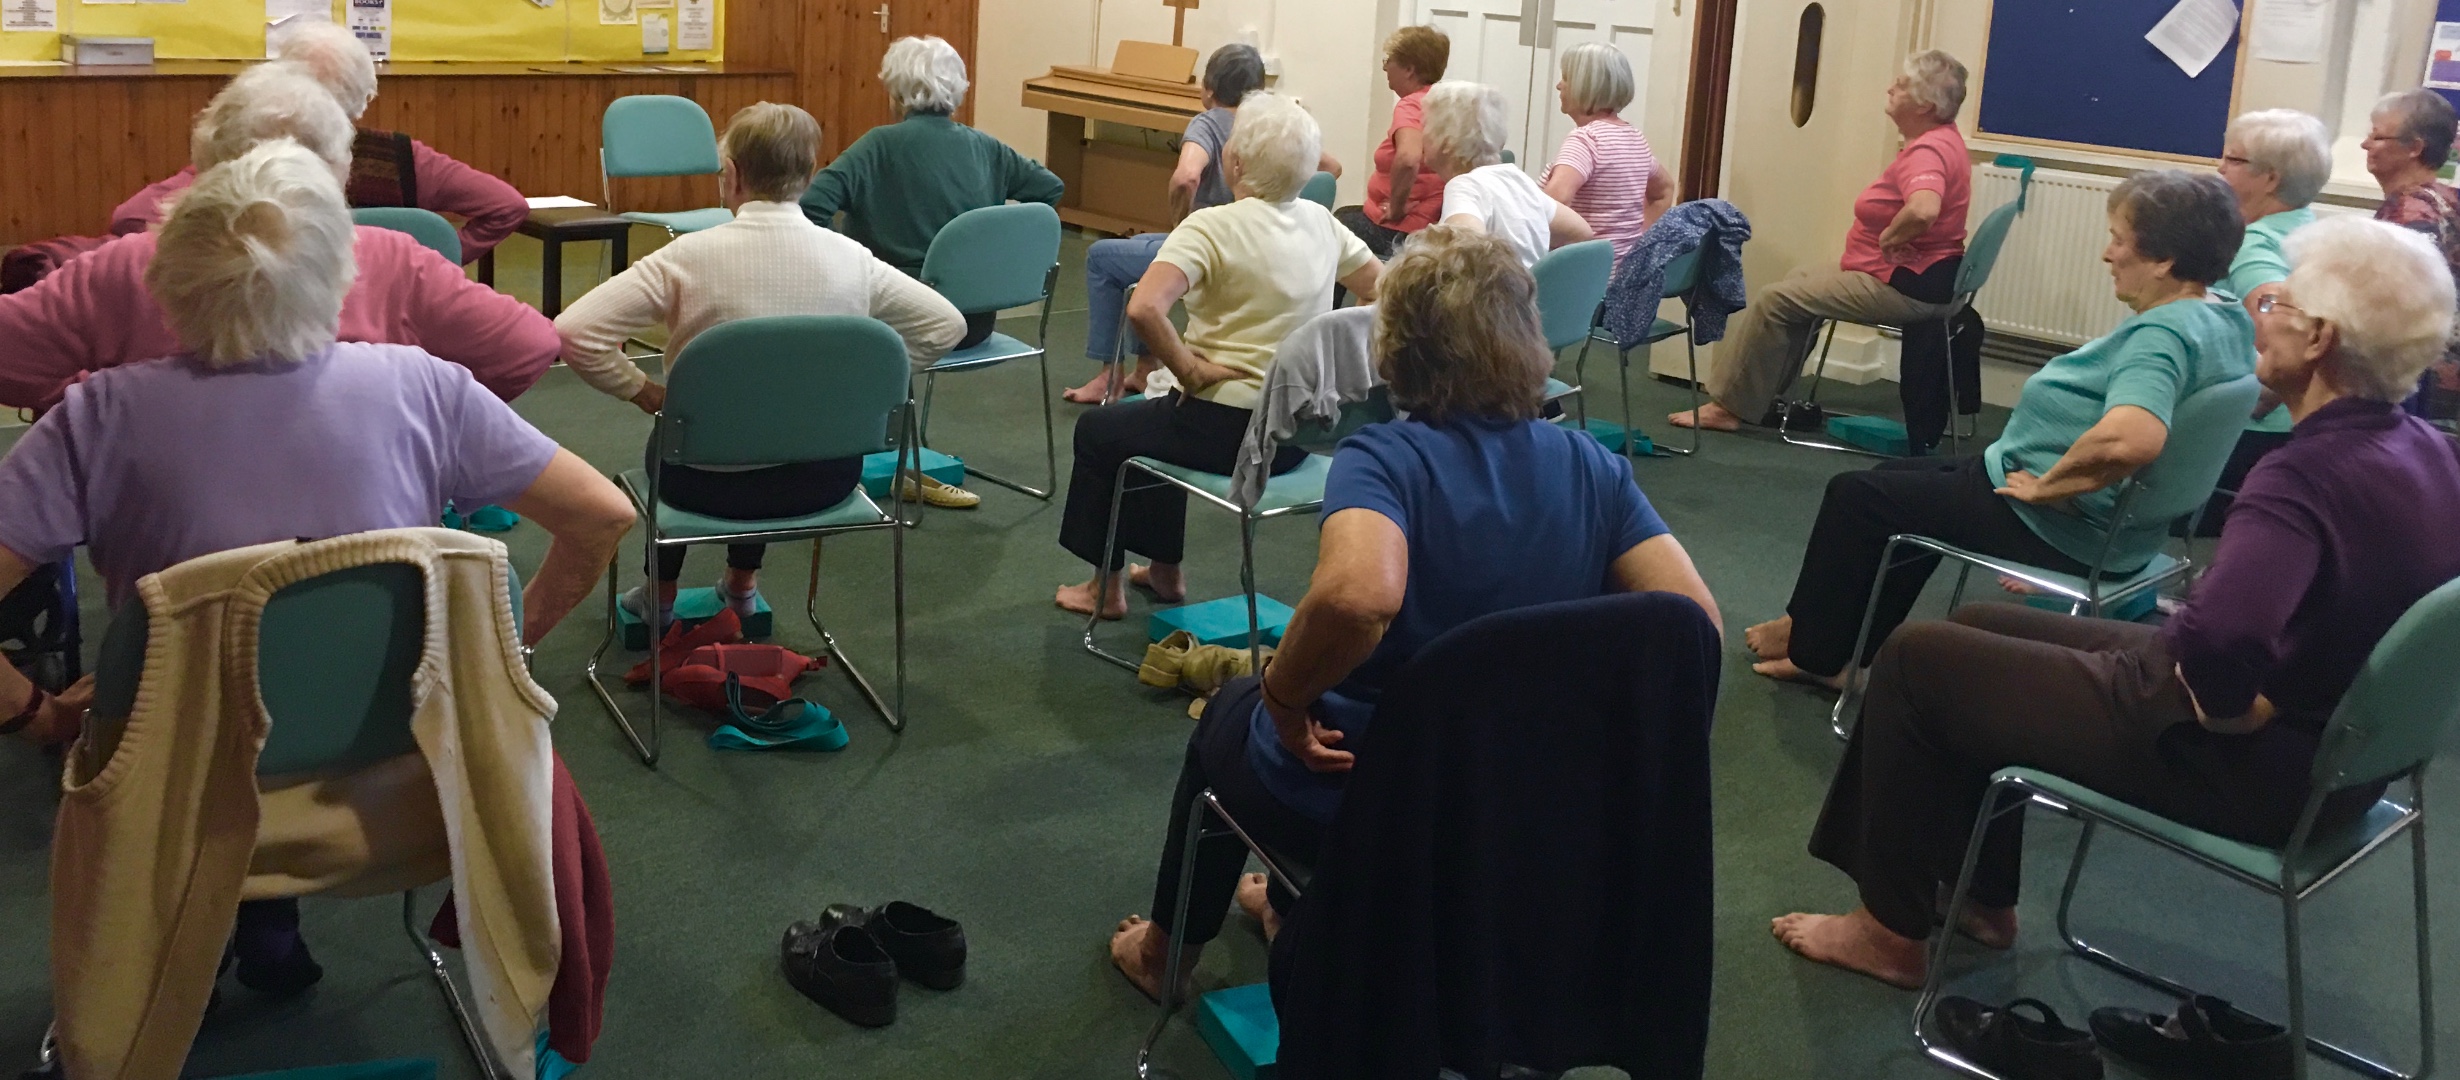 Senior citizens enjoying an exercise class seated in chairs.